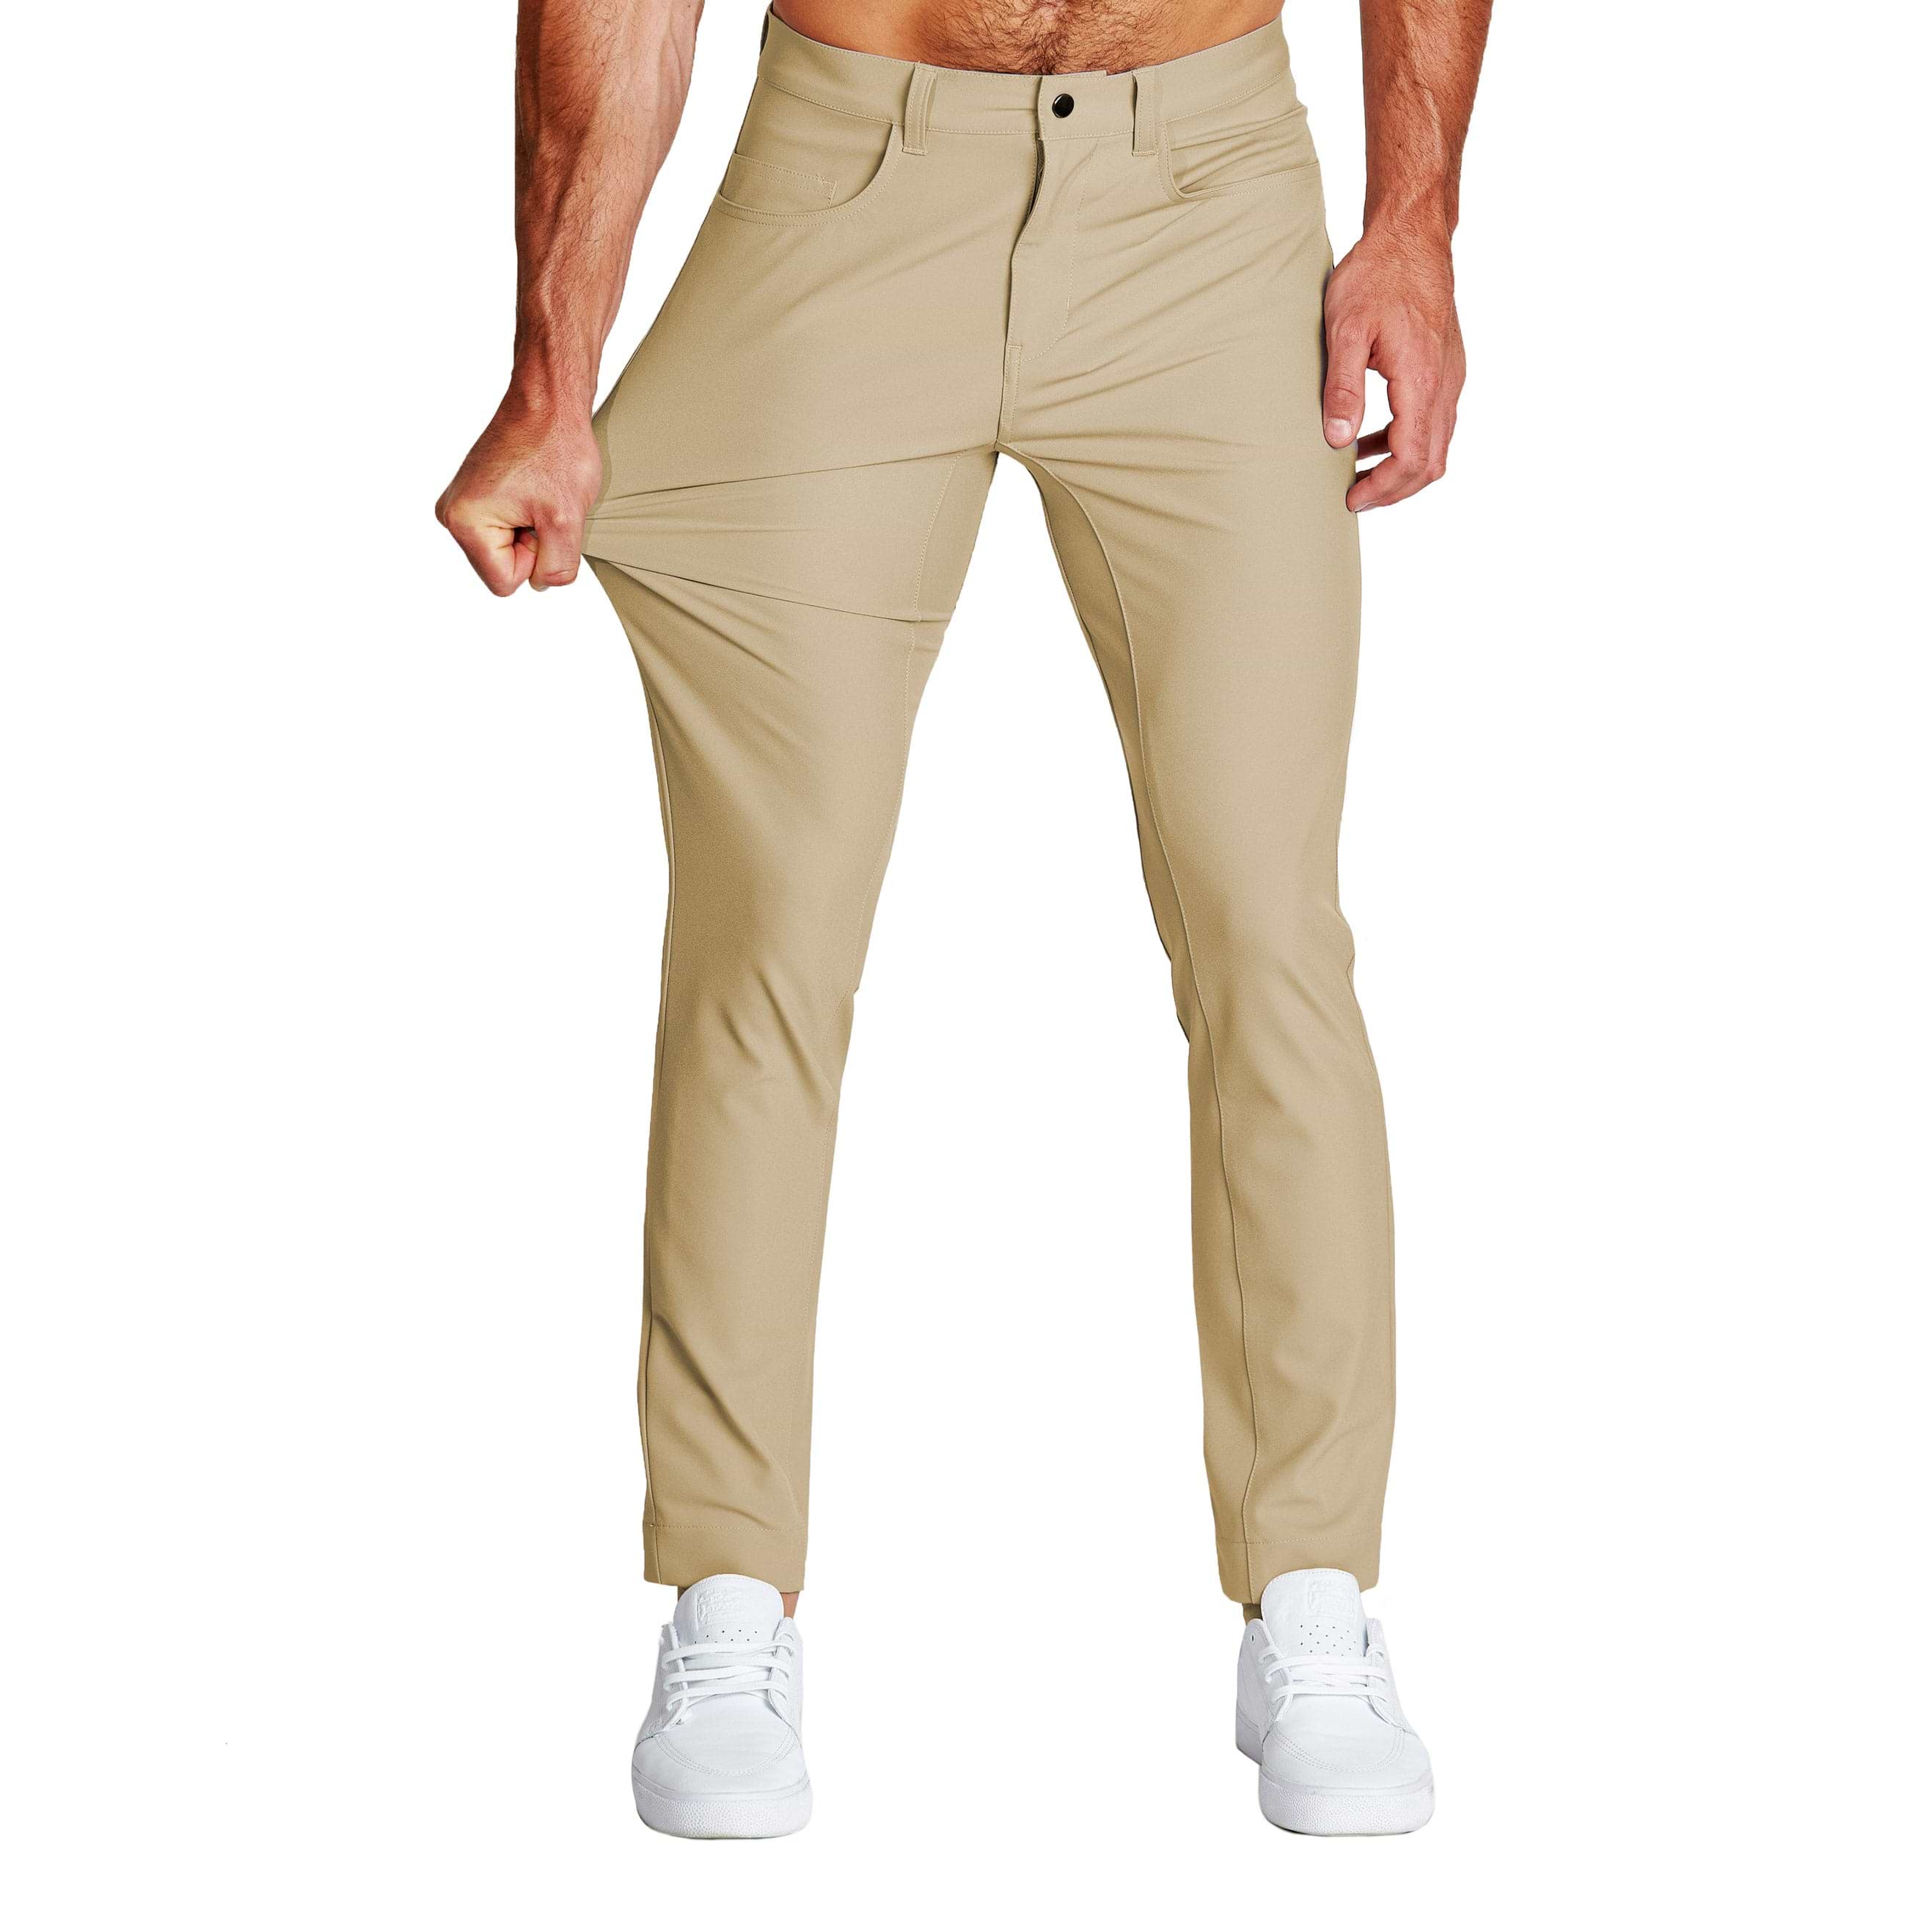 Mens Casual Stretch Khaki Pant,Classic Fit High Waist Casual Pants  Wrinkle-Resistant Flat-Front Chino Pant Dress Pants for Working Business  Occasion Everyday Outfit,Waist 29